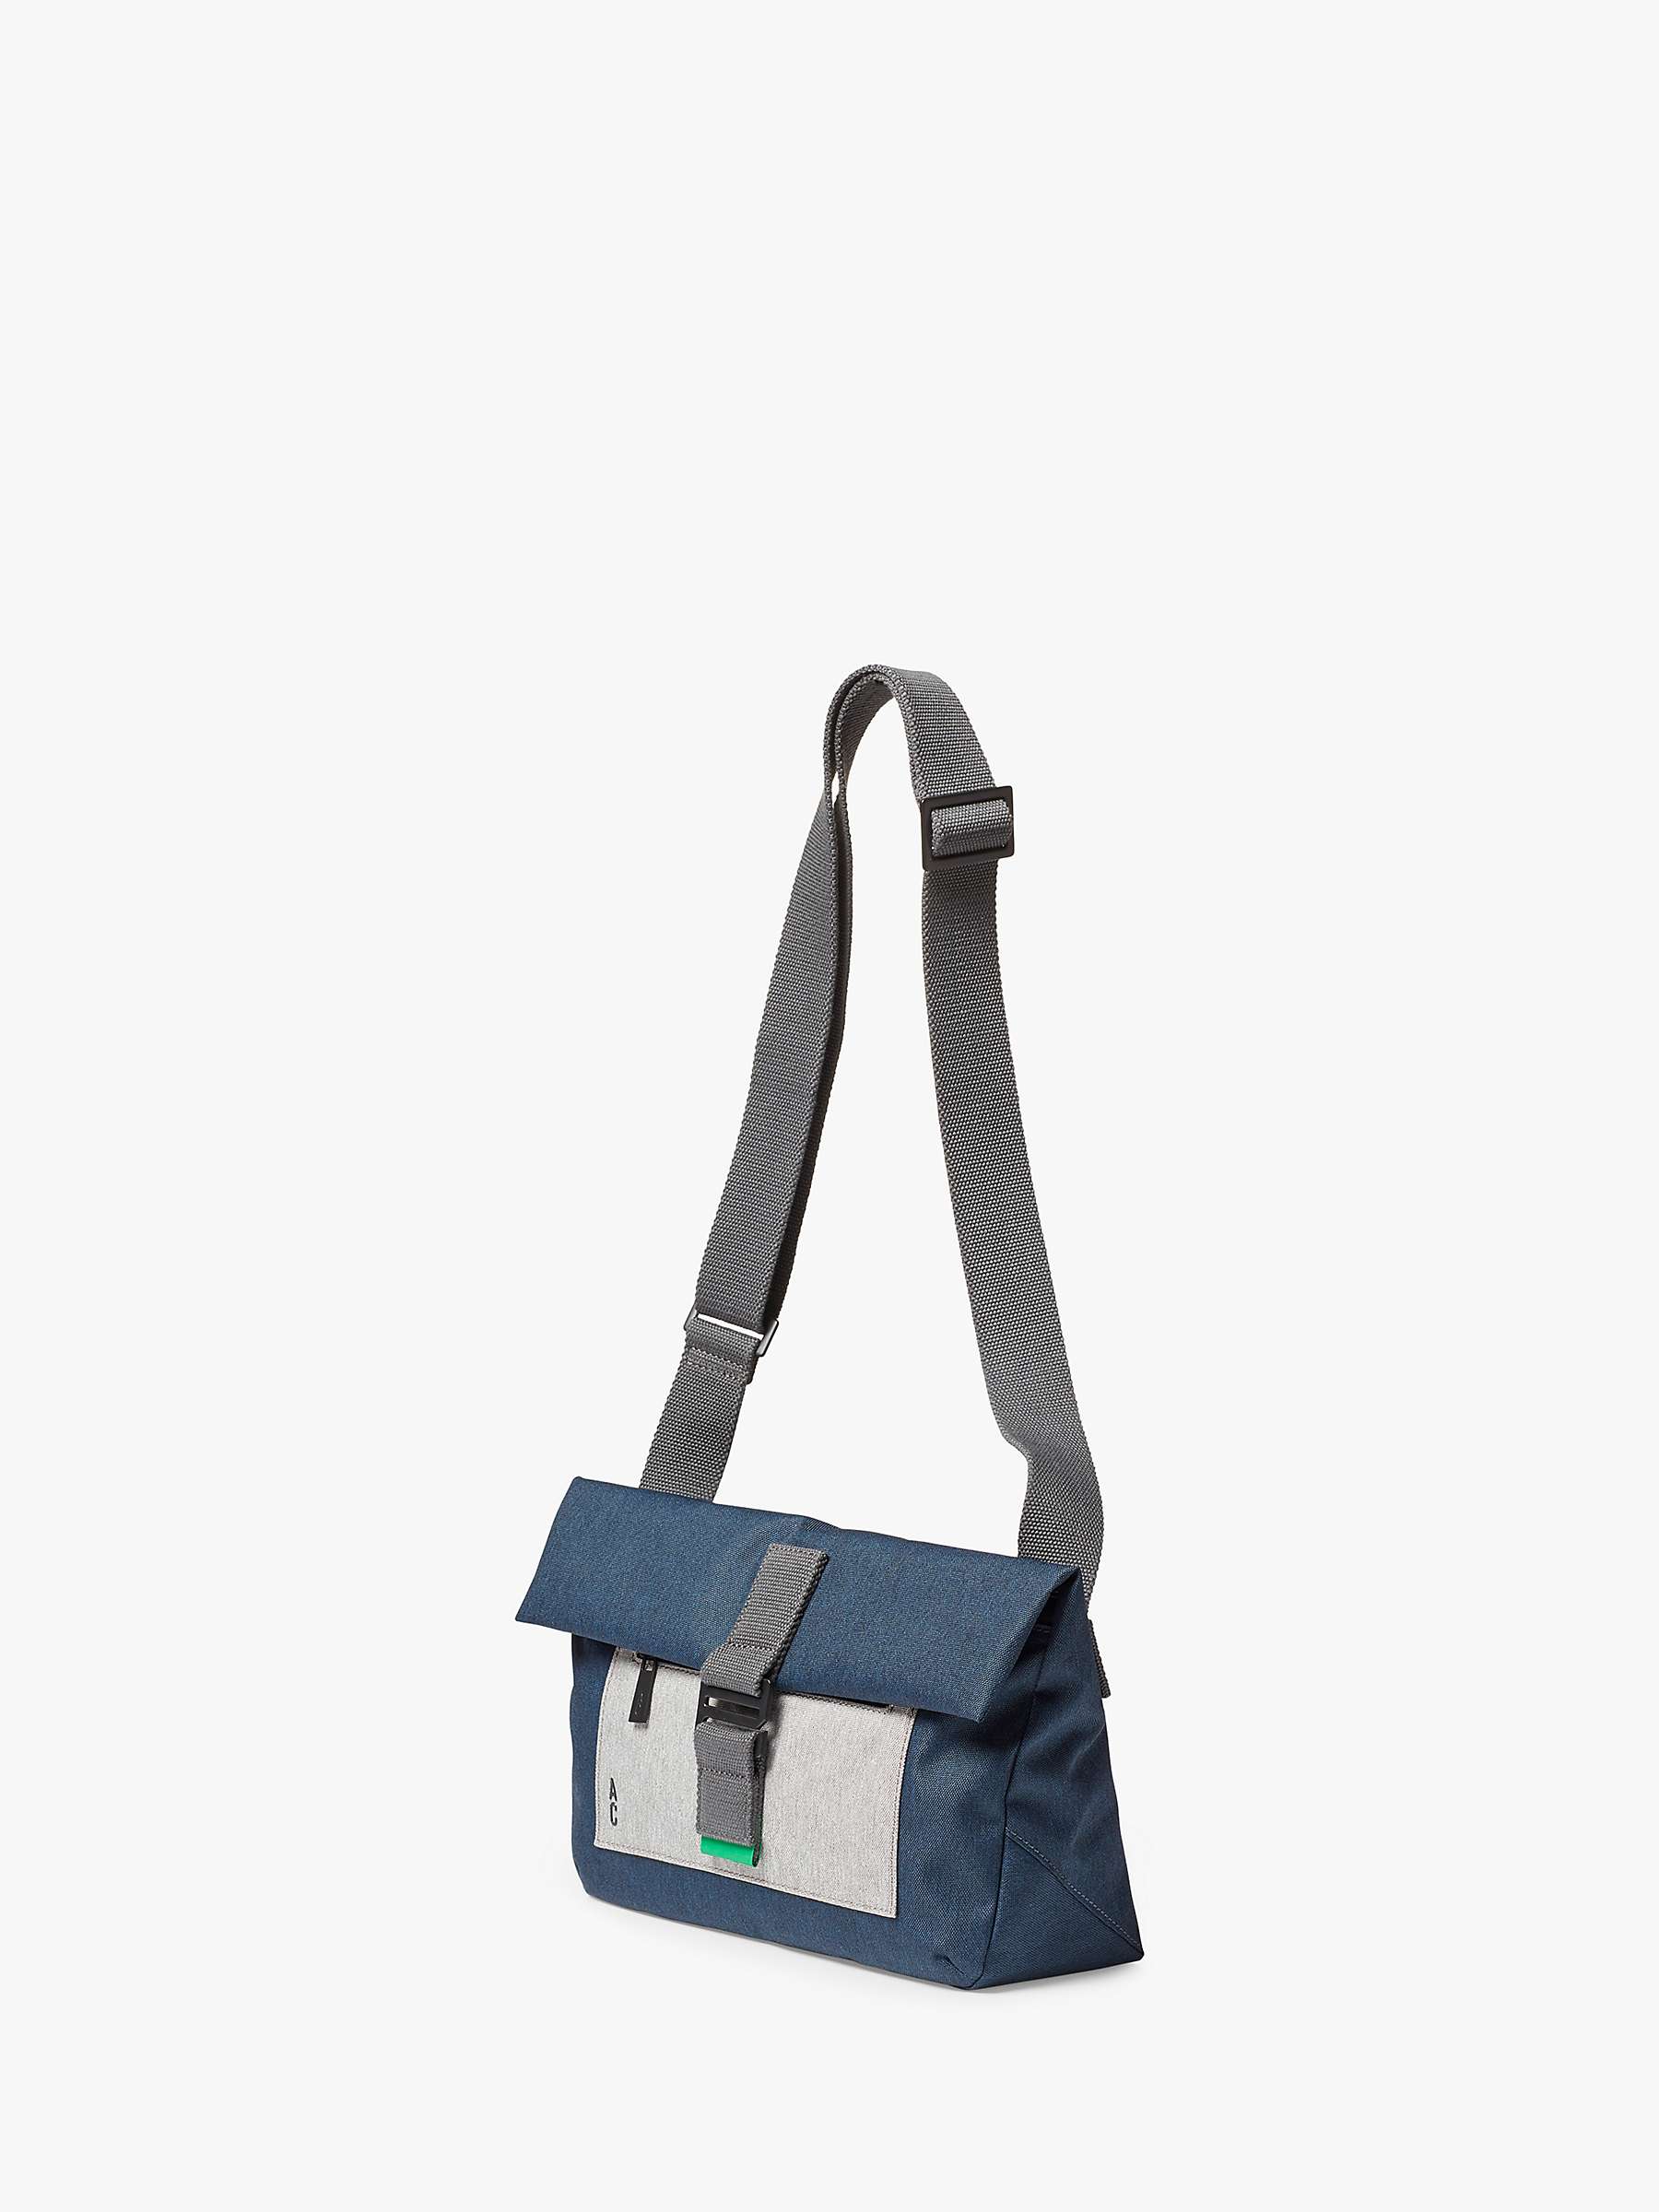 Buy Ally Capellino Travis Travel Cycle Satchel Bag Online at johnlewis.com